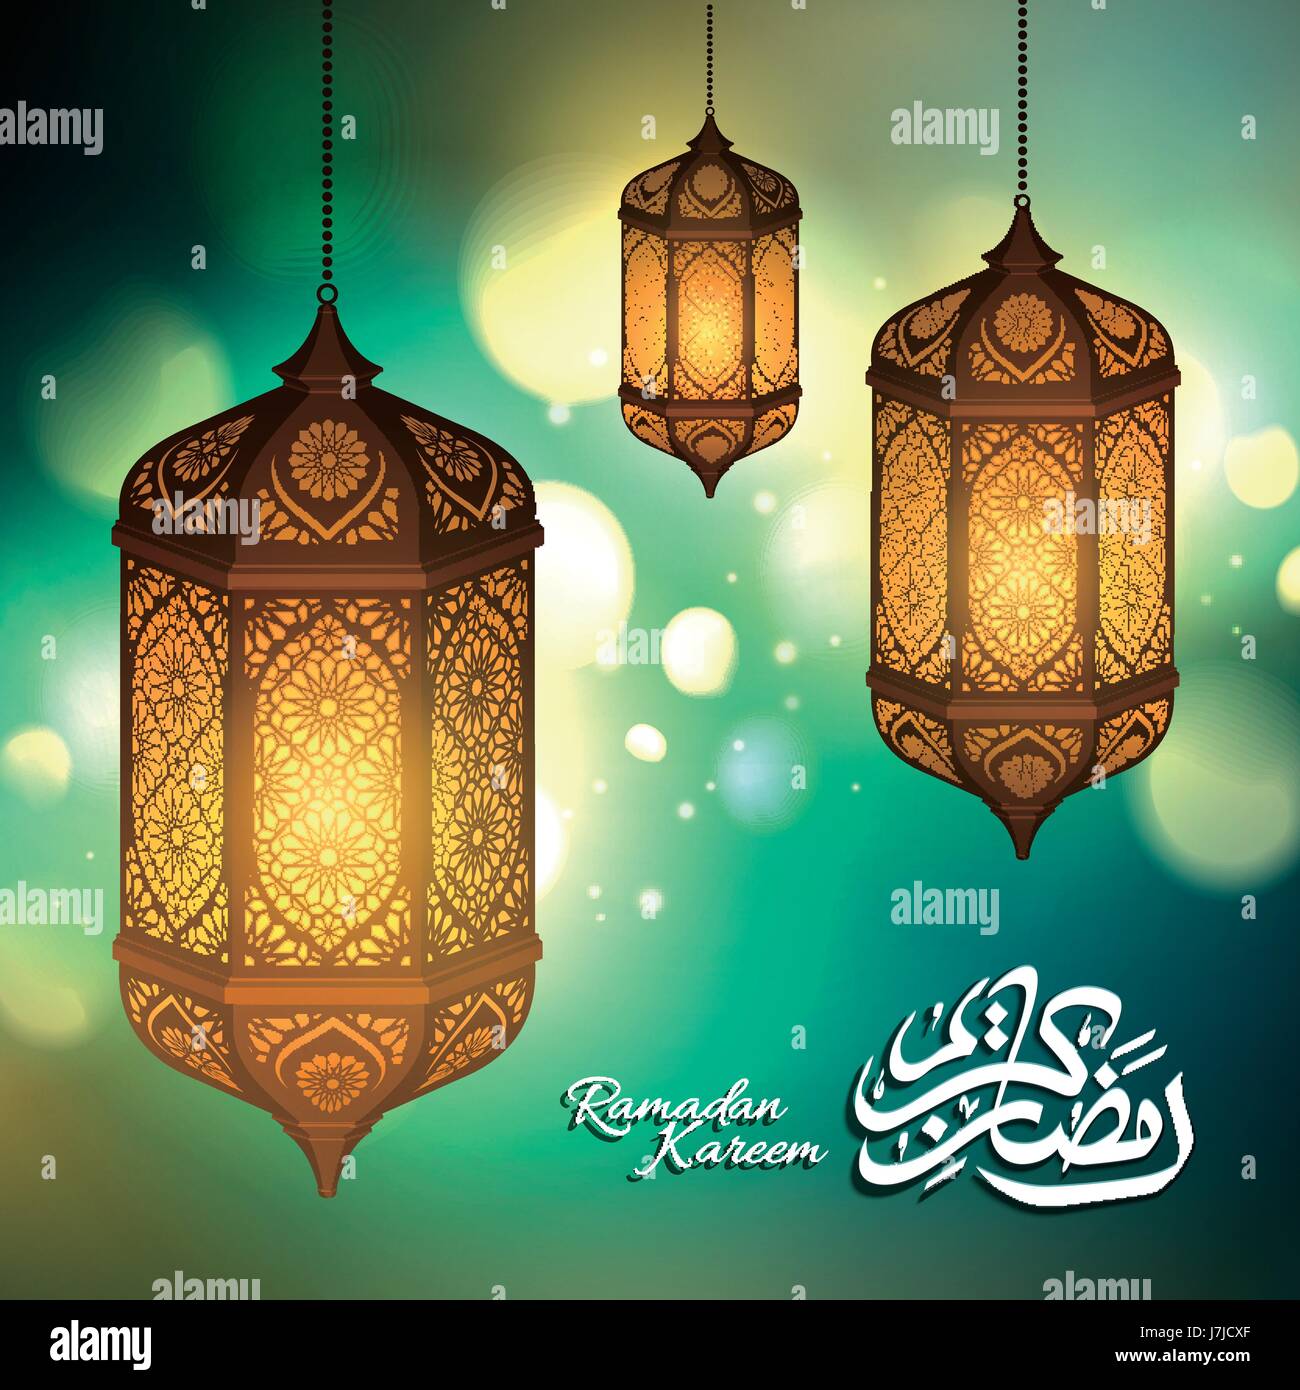 Ramadan Kareem calligraphy design with traditional lantern decorations, glimmering green background Stock Vector